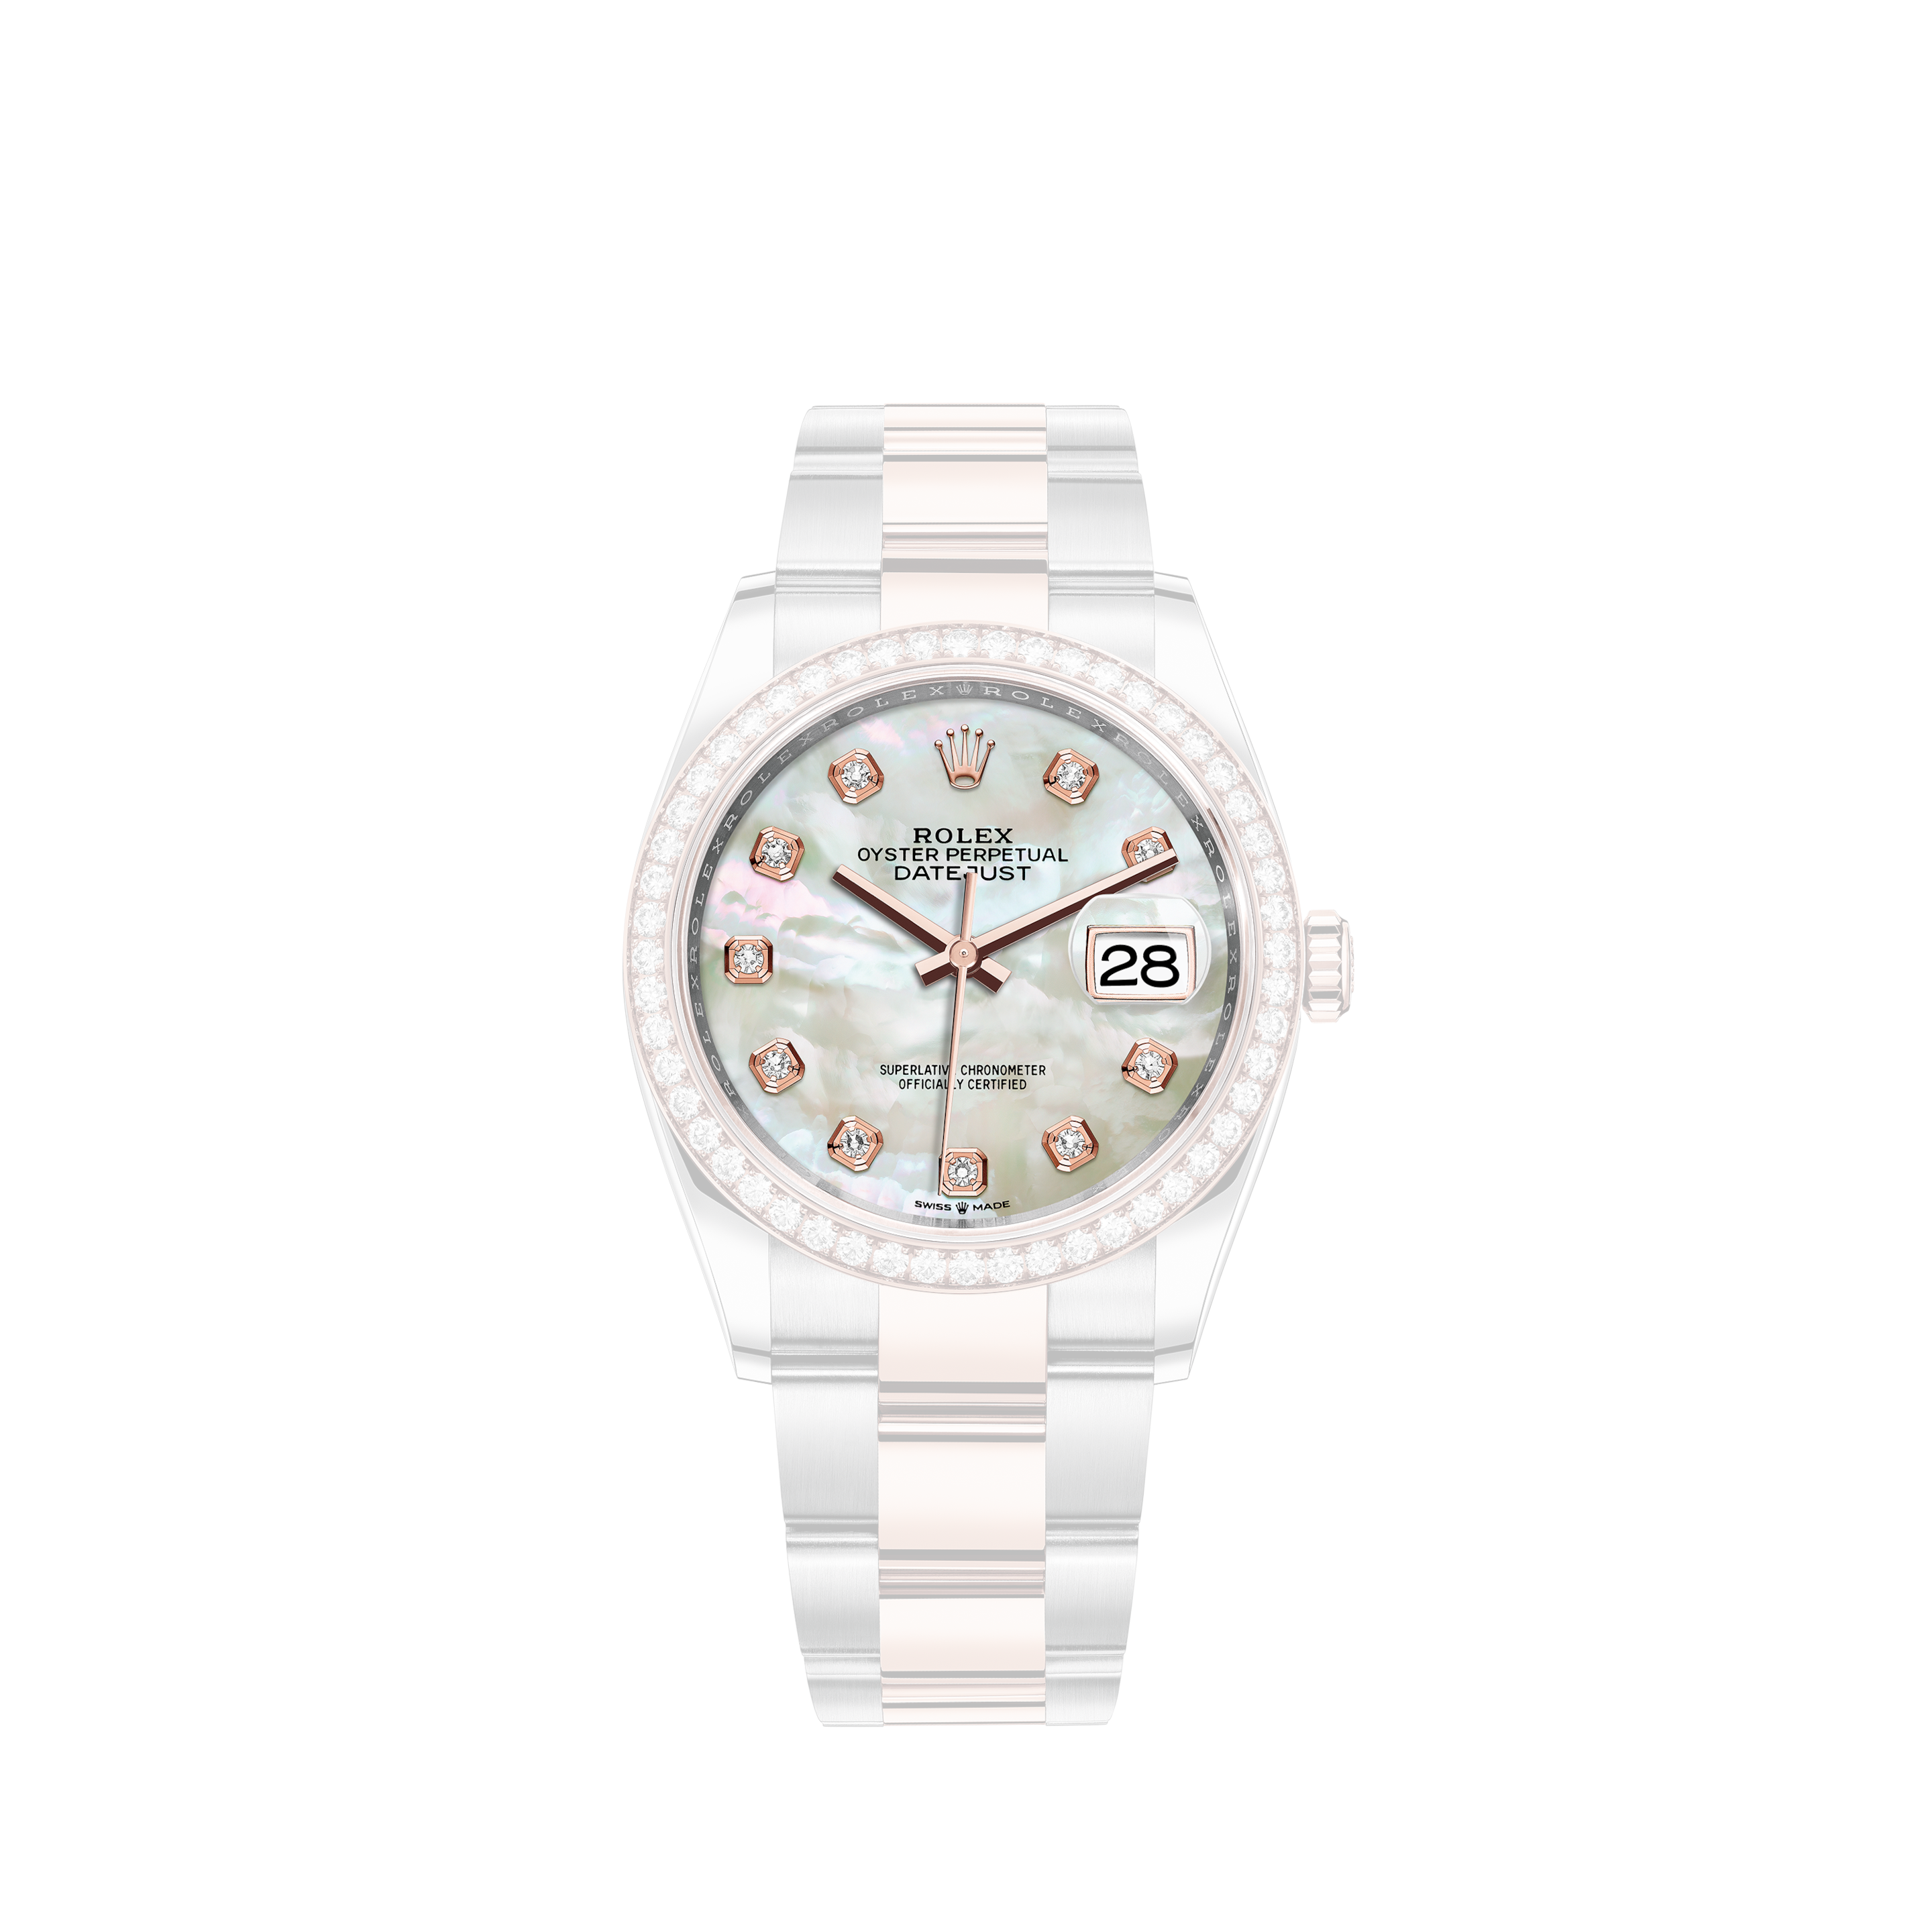 Rolex Cosmograph Daytona 116508 White Mother-of-Pearl Diamond DialRolex Cosmograph Daytona 116509